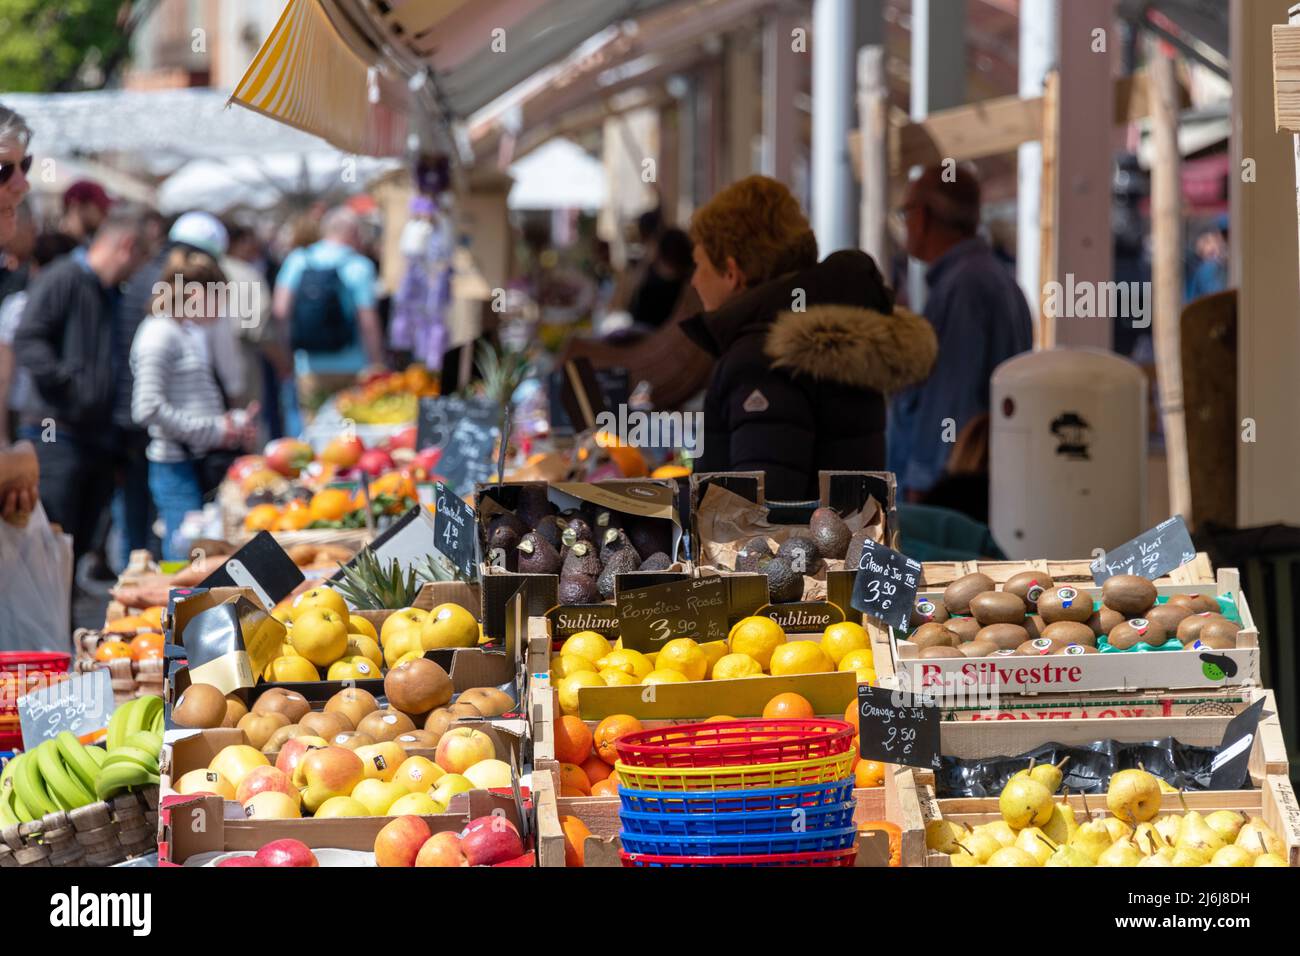 The Flower and food market in Nice, France. Stock Photo